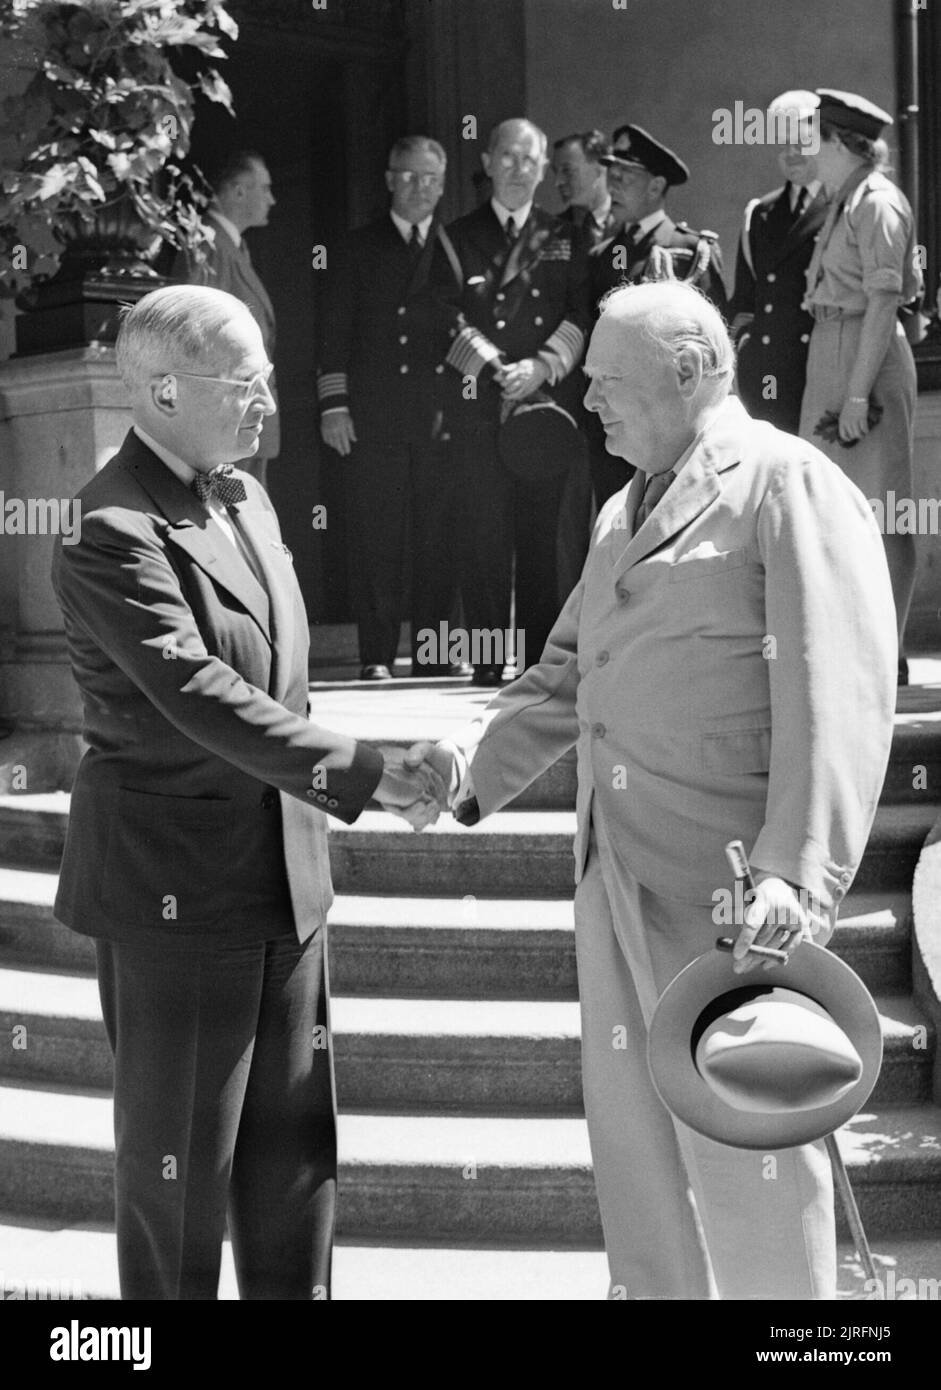 President Harry Truman and Winston Churchill shake hands on the steps of Truman's residence during the Potsdam conference, 16 July 1945. Prime Minister Winston Churchill and US President Harry Truman shake hands on the steps of Truman's residence, 'The White House', at Kaiser Strasse, Babelsberg, Germany, on 16 July 1945. Stock Photo